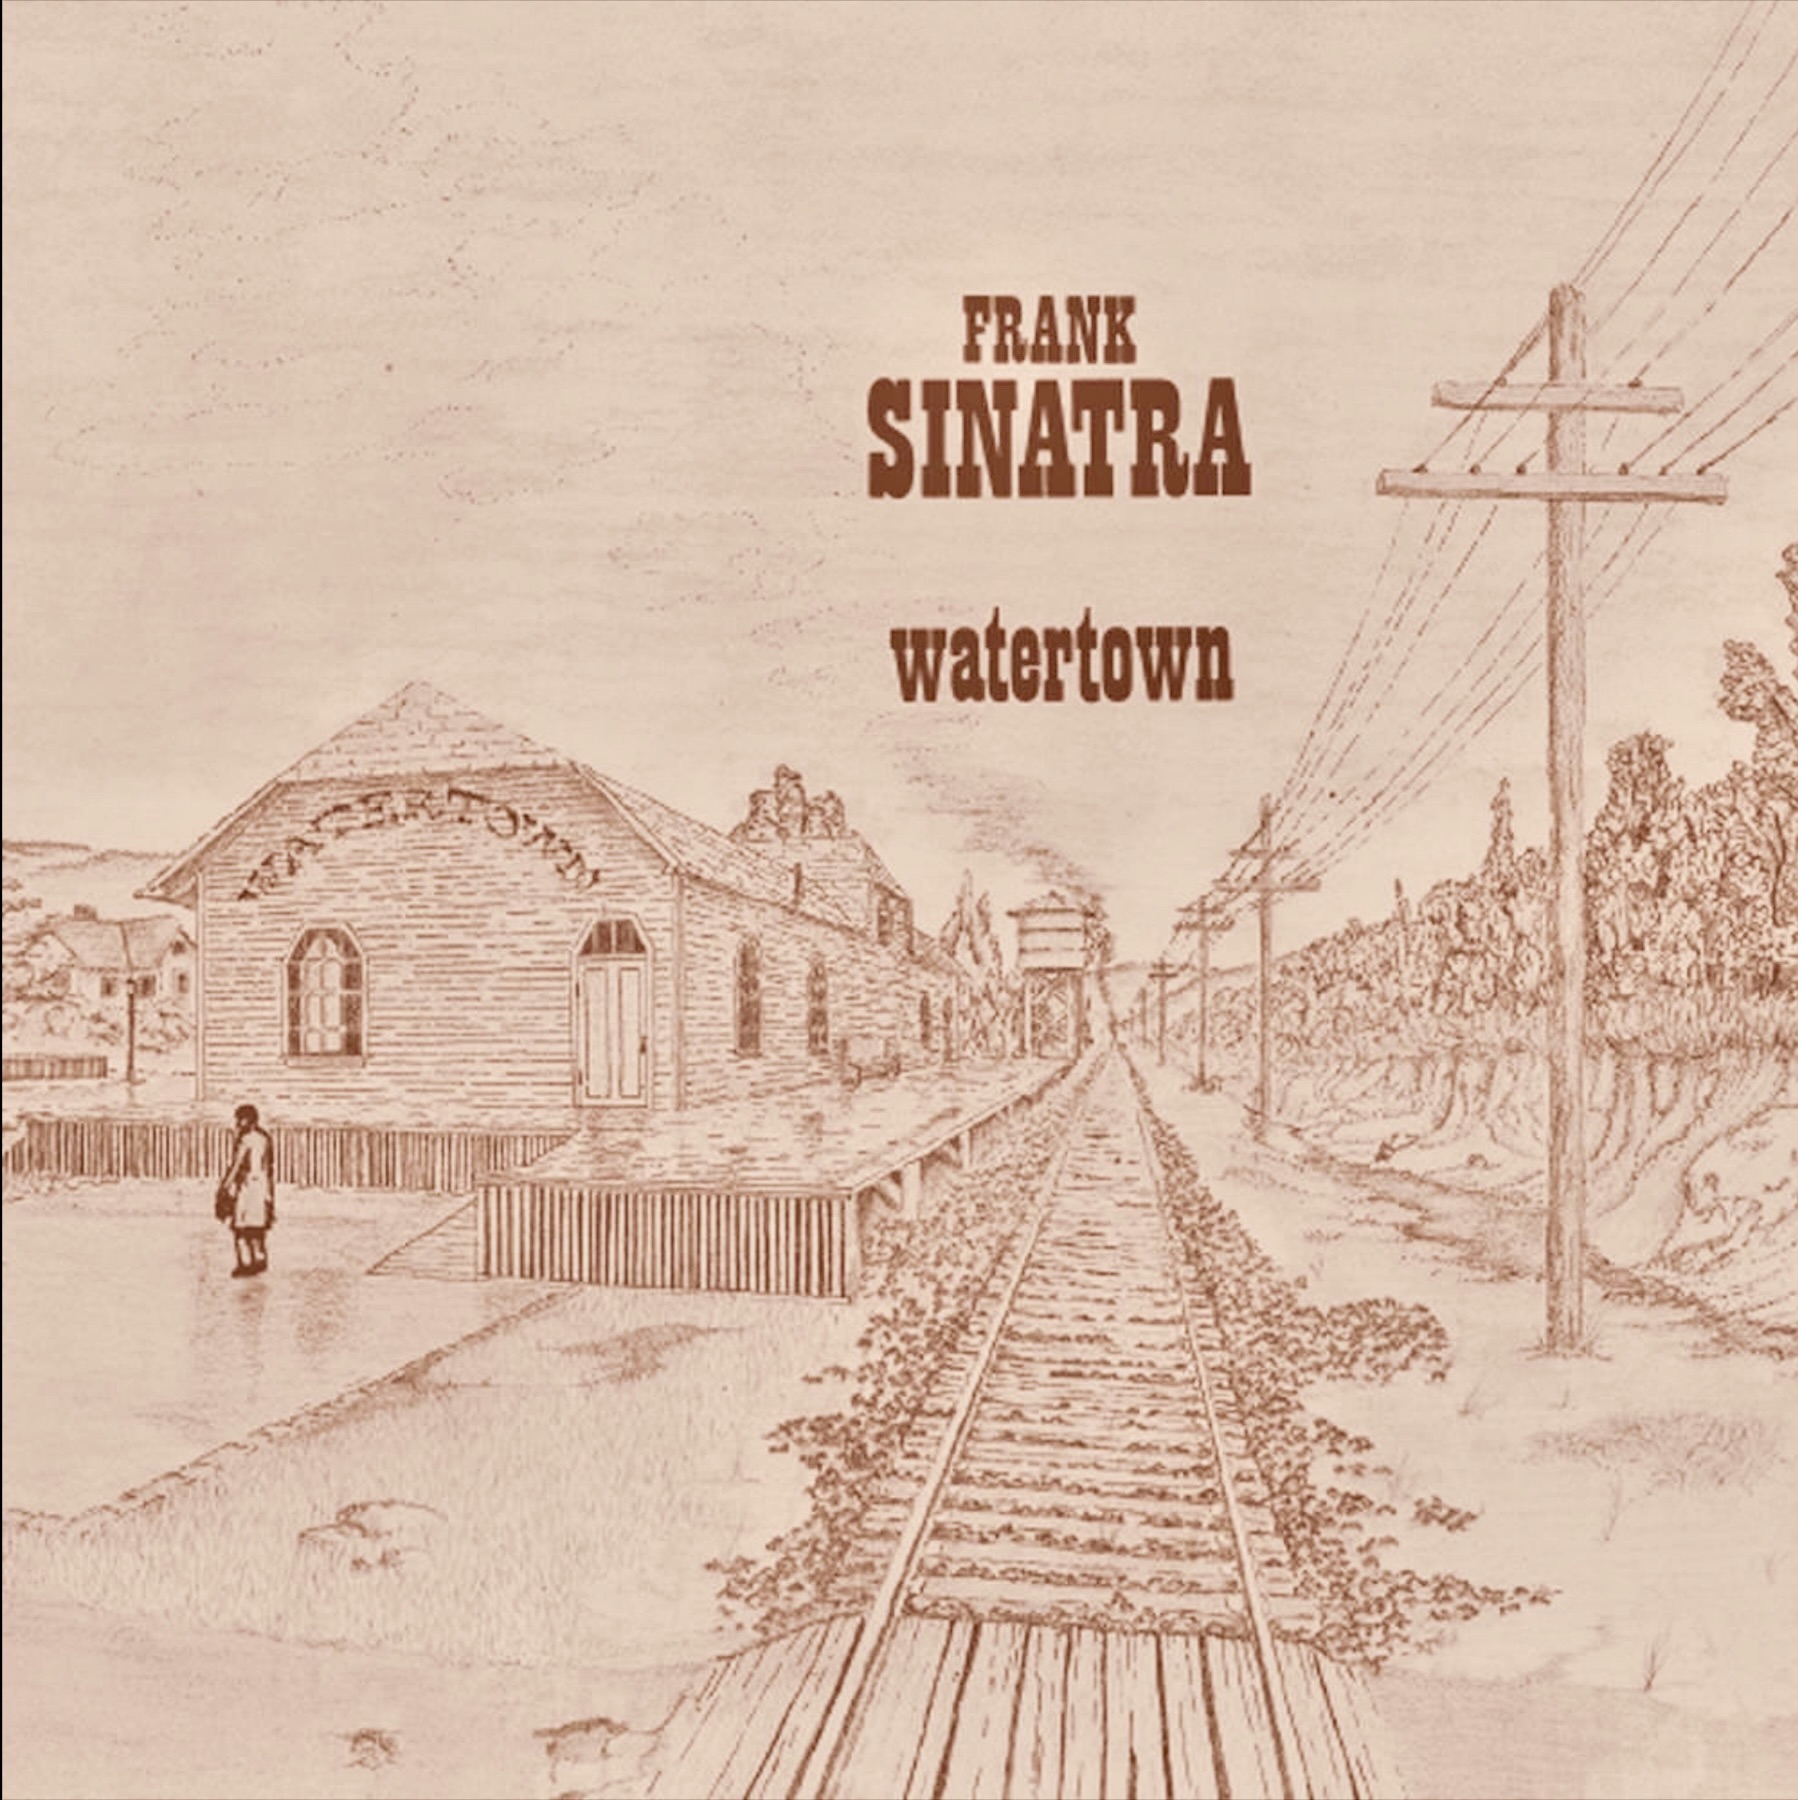 Watertown, Frank Sinatra's Concept Album from 1970